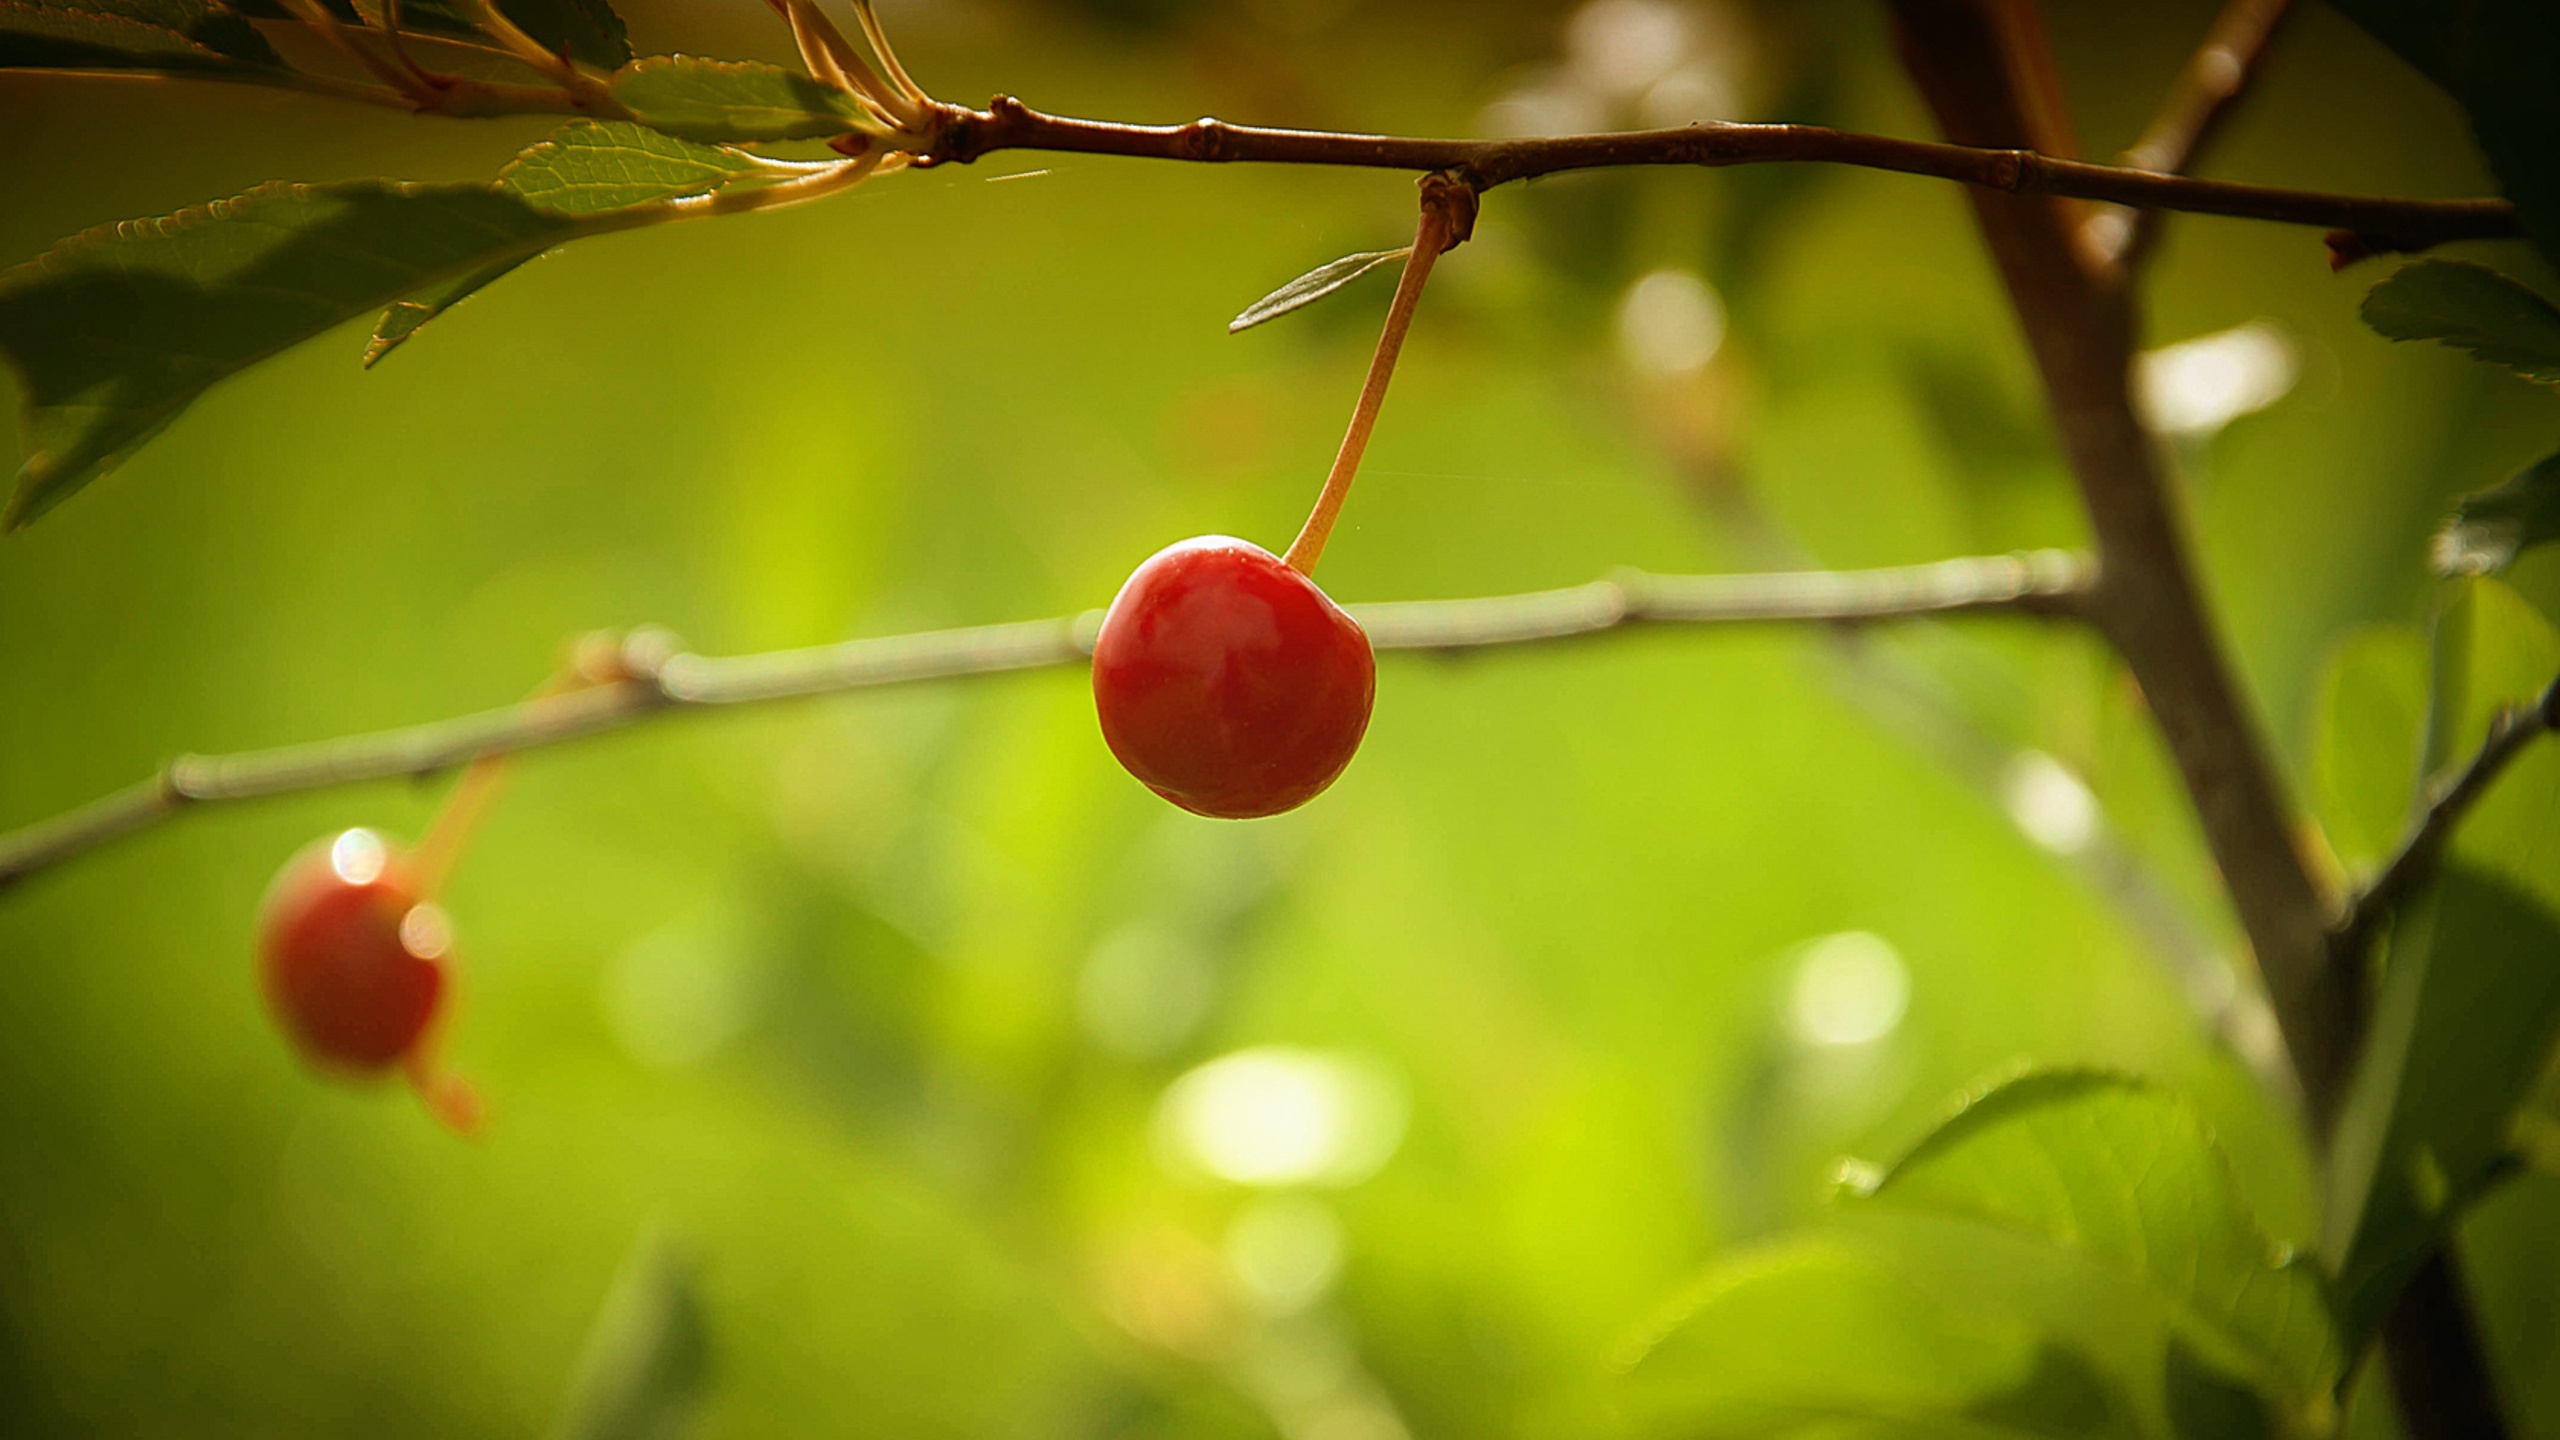 Berries On A Branch pc wallpaper